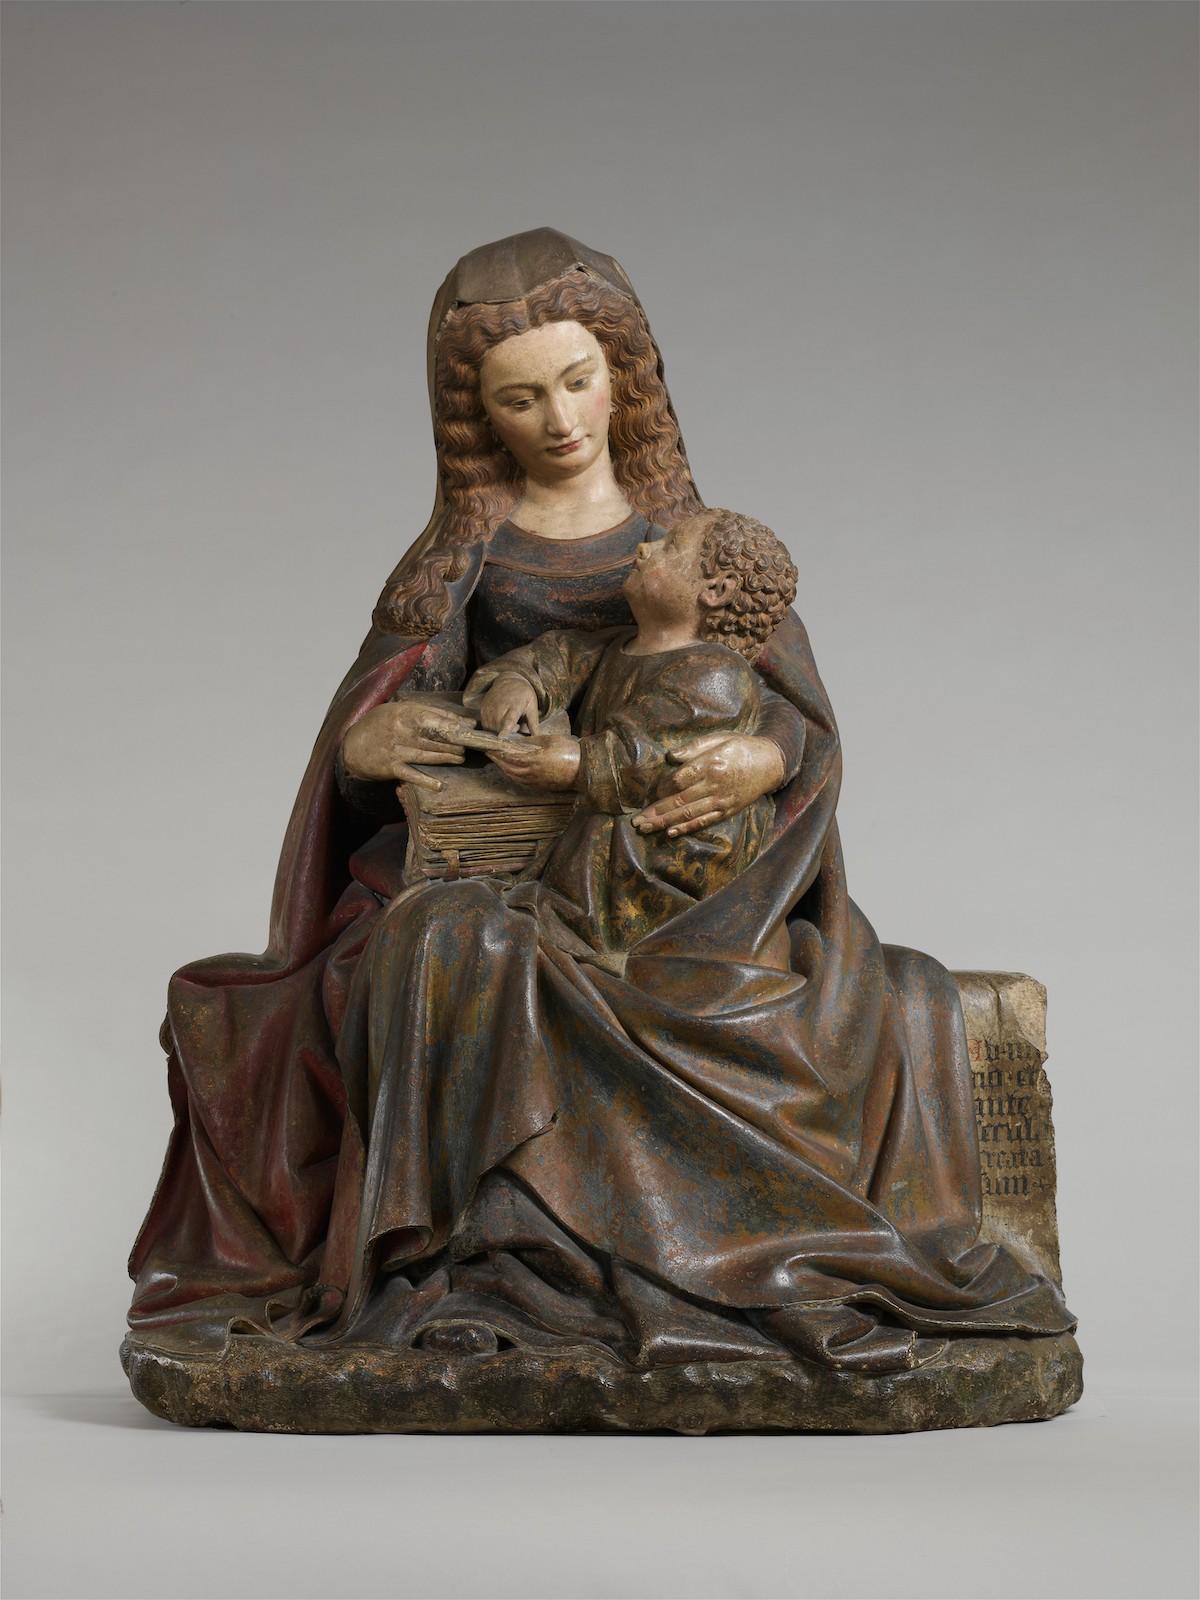 Claus de Werve, Virgin and Child, c. 1415 - 17. Limestone with paint and gilding. 53 3:8 x 41 1:8 x 27 in. The Met. Rogers Fund, 1933. 33.23